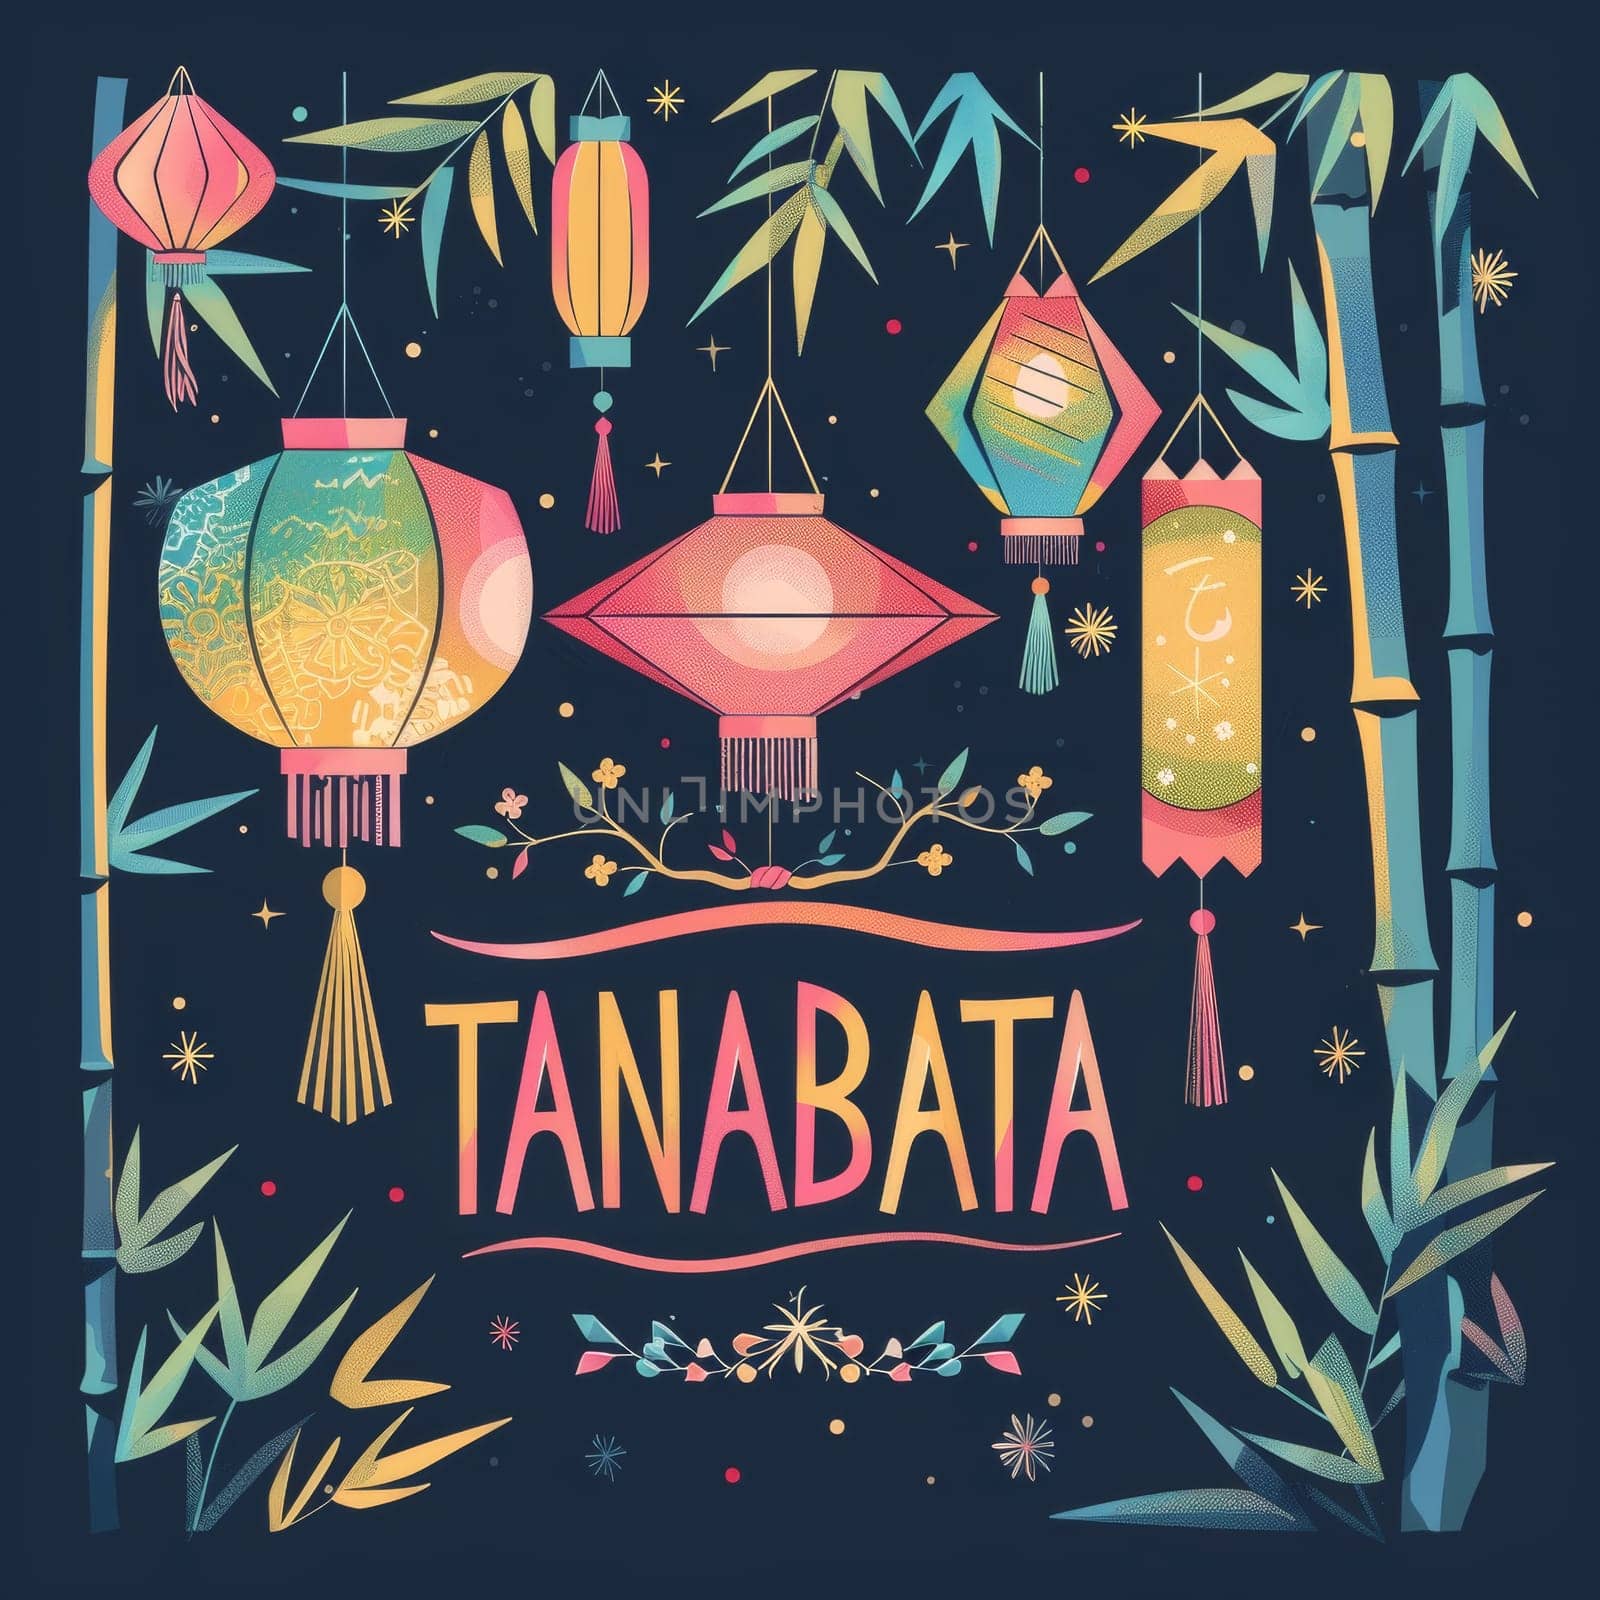 A vivid illustration depicting the Tanabata festival with ornate paper lanterns and bamboo on a starry background